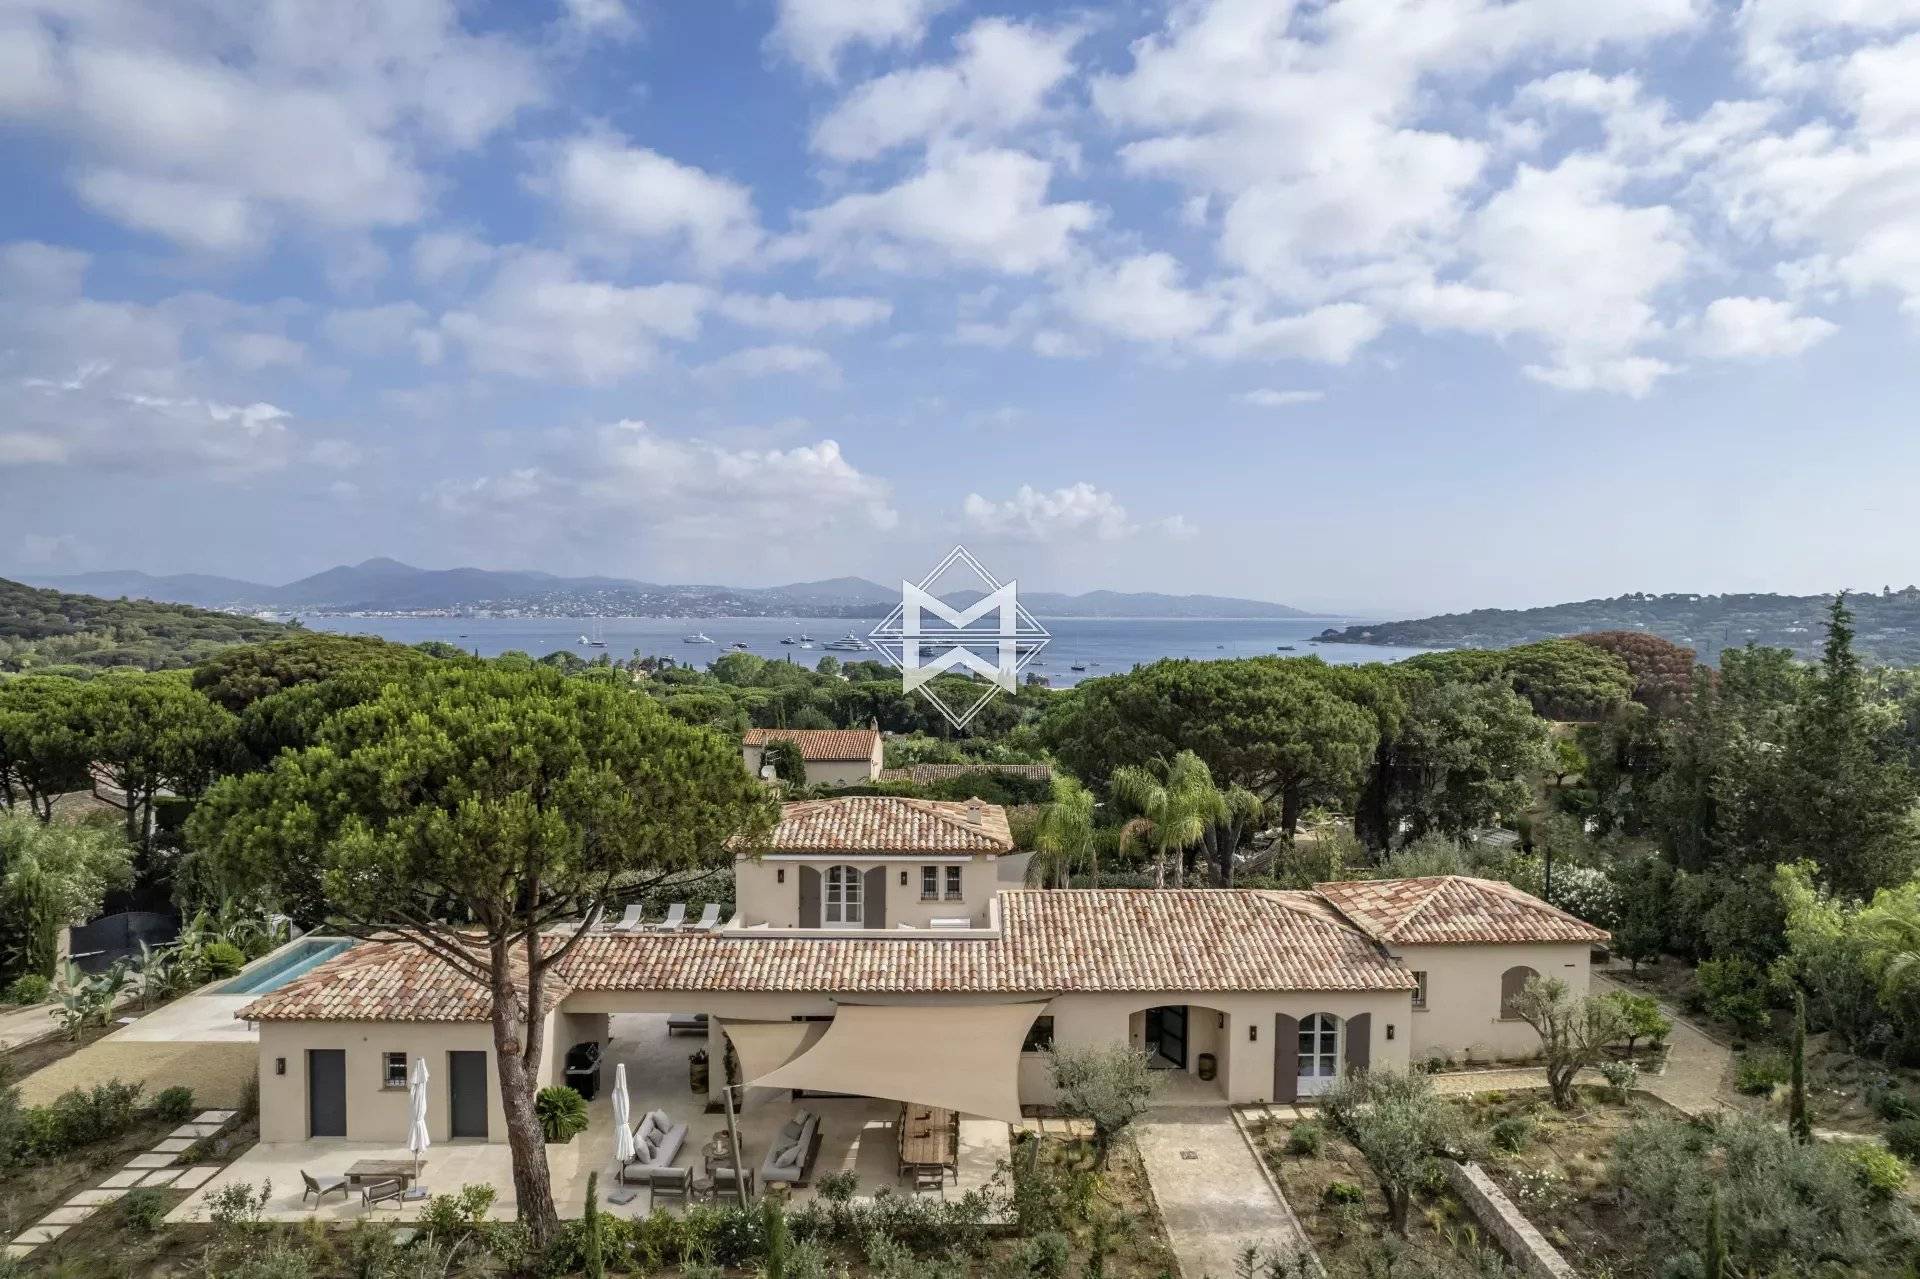 Magnificent sea view, only 2 kilometers away from the center of Saint Tropez and Pampelonne, close to the center of Saint Tropez and Cap Tahiti